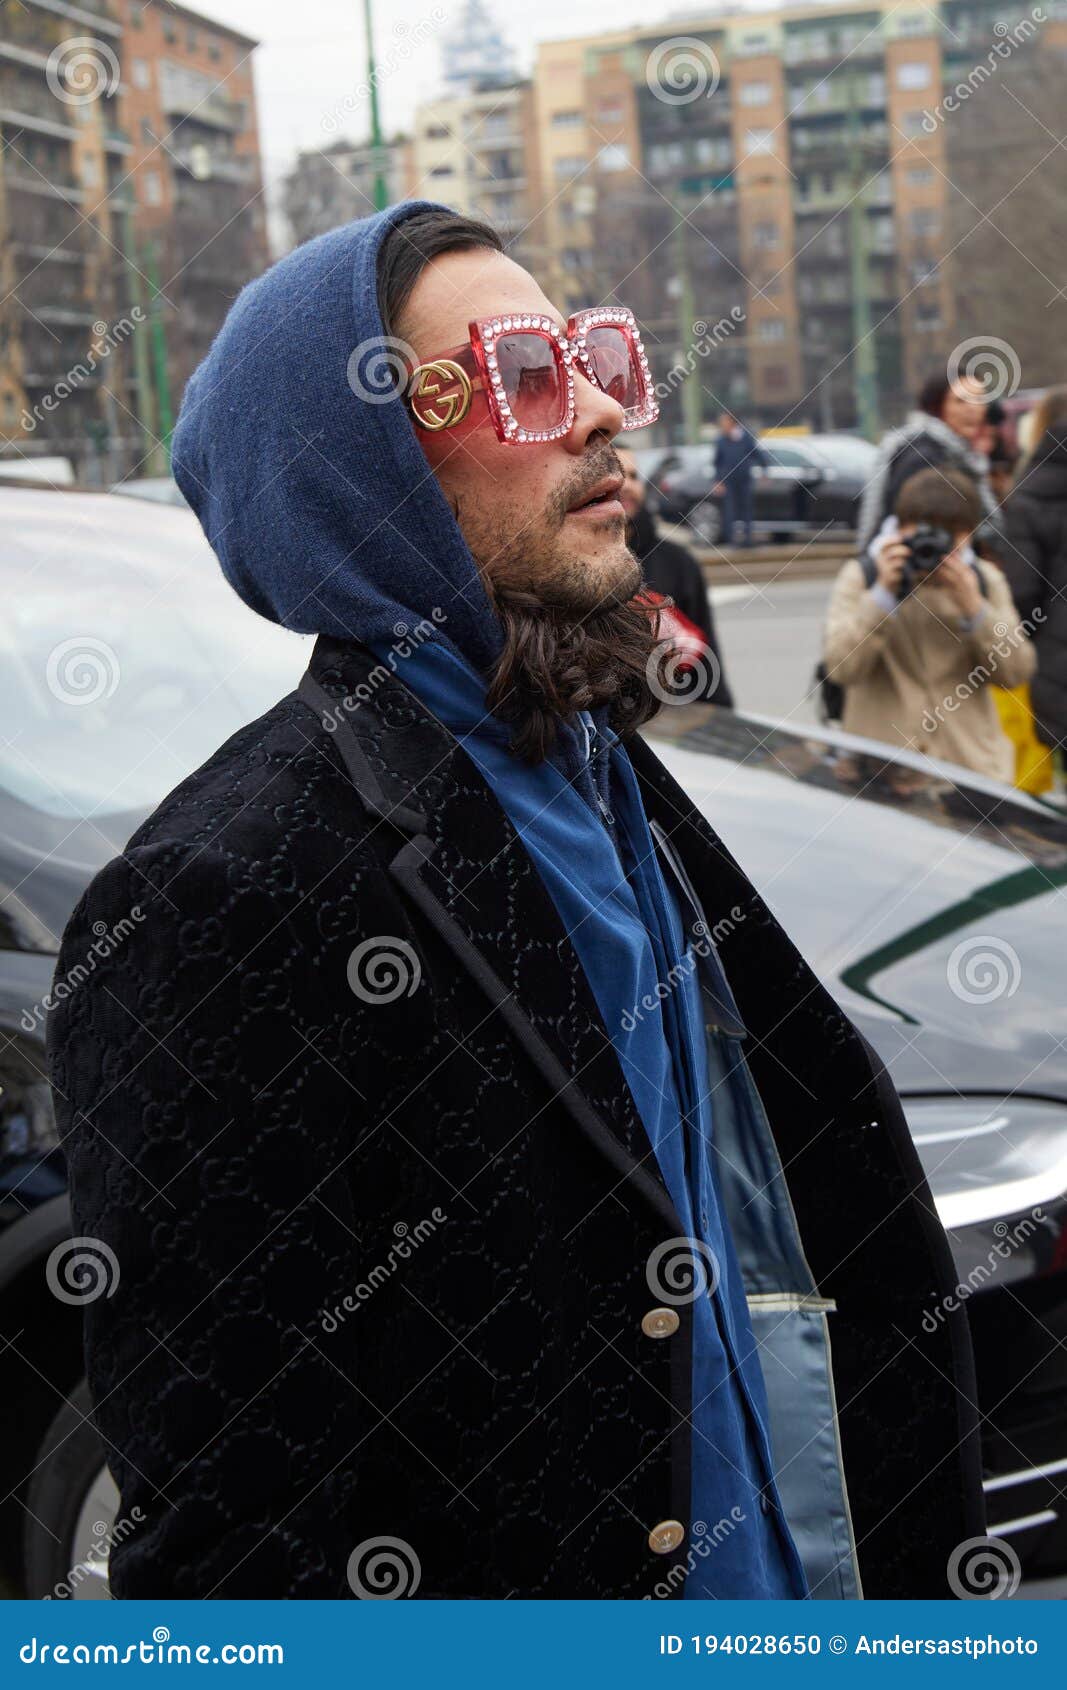 Man with Black Velvet Gucci Jacket and Pink Sunglasses before